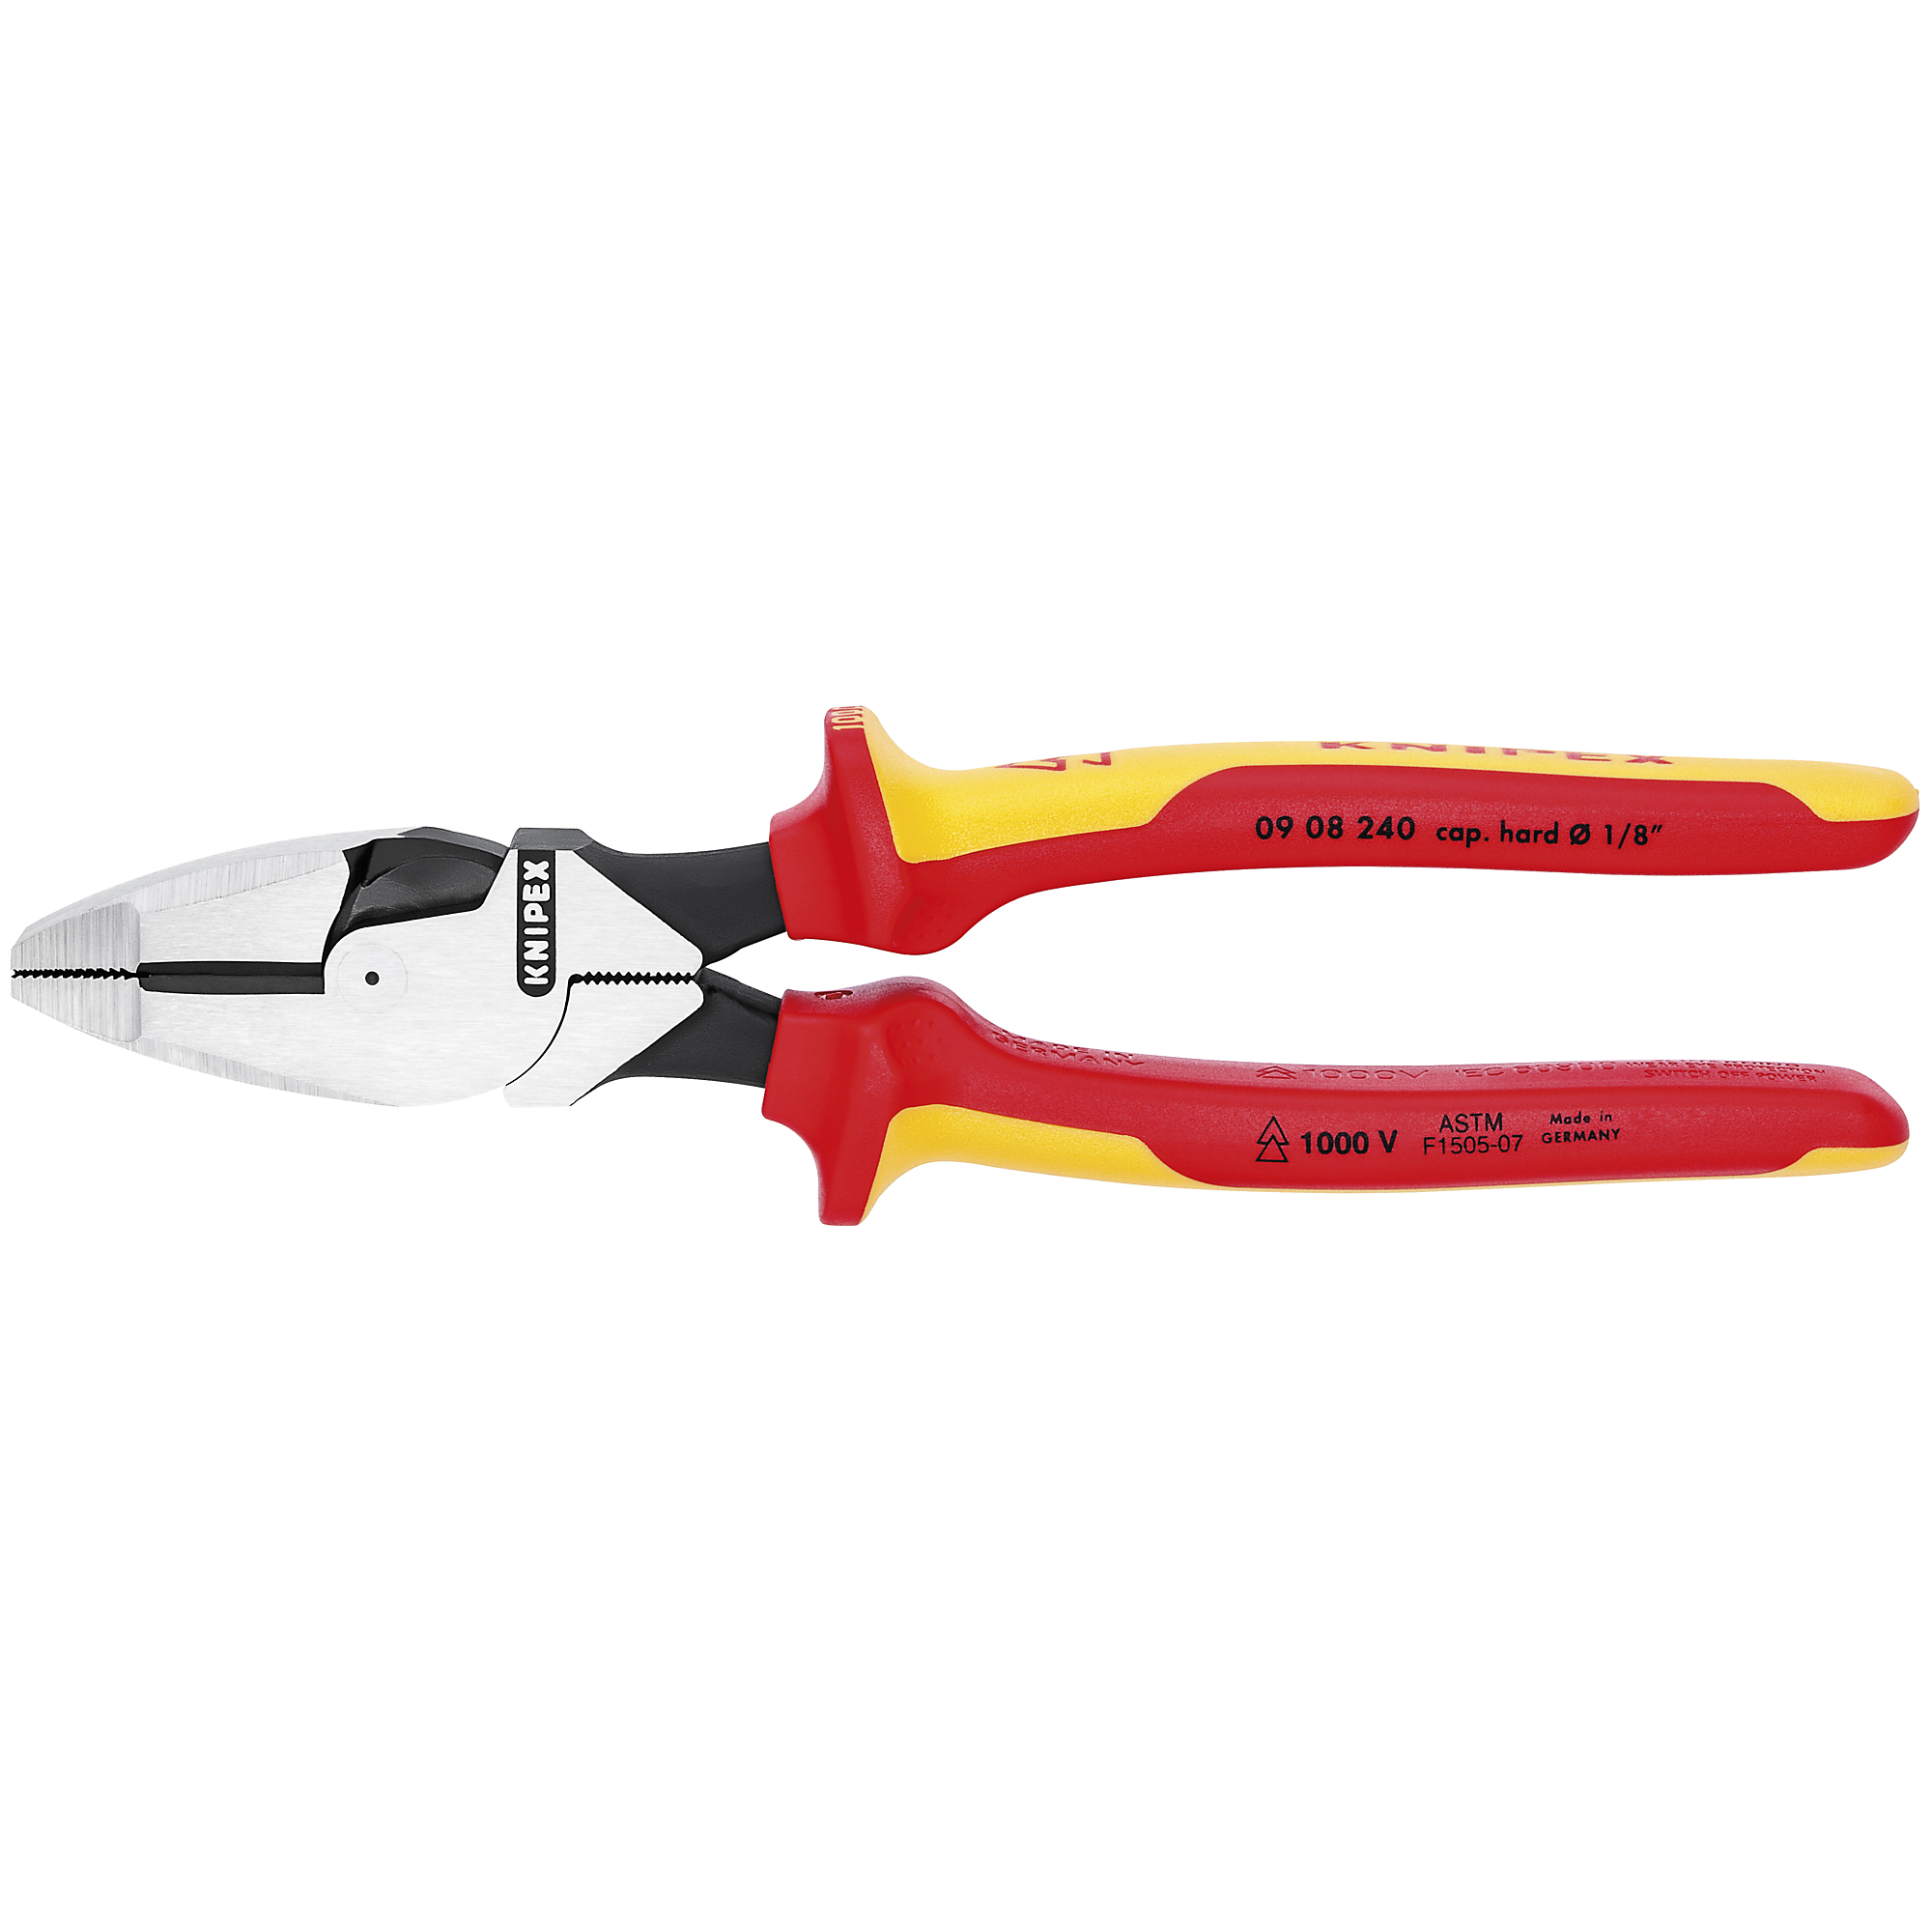 KNIPEX, HL Linemans NewEngland Head-1000V, 9.5Inch, Pieces (qty.) 1 Material Steel, Jaw Capacity 0.186 in, Model 09 08 240 US